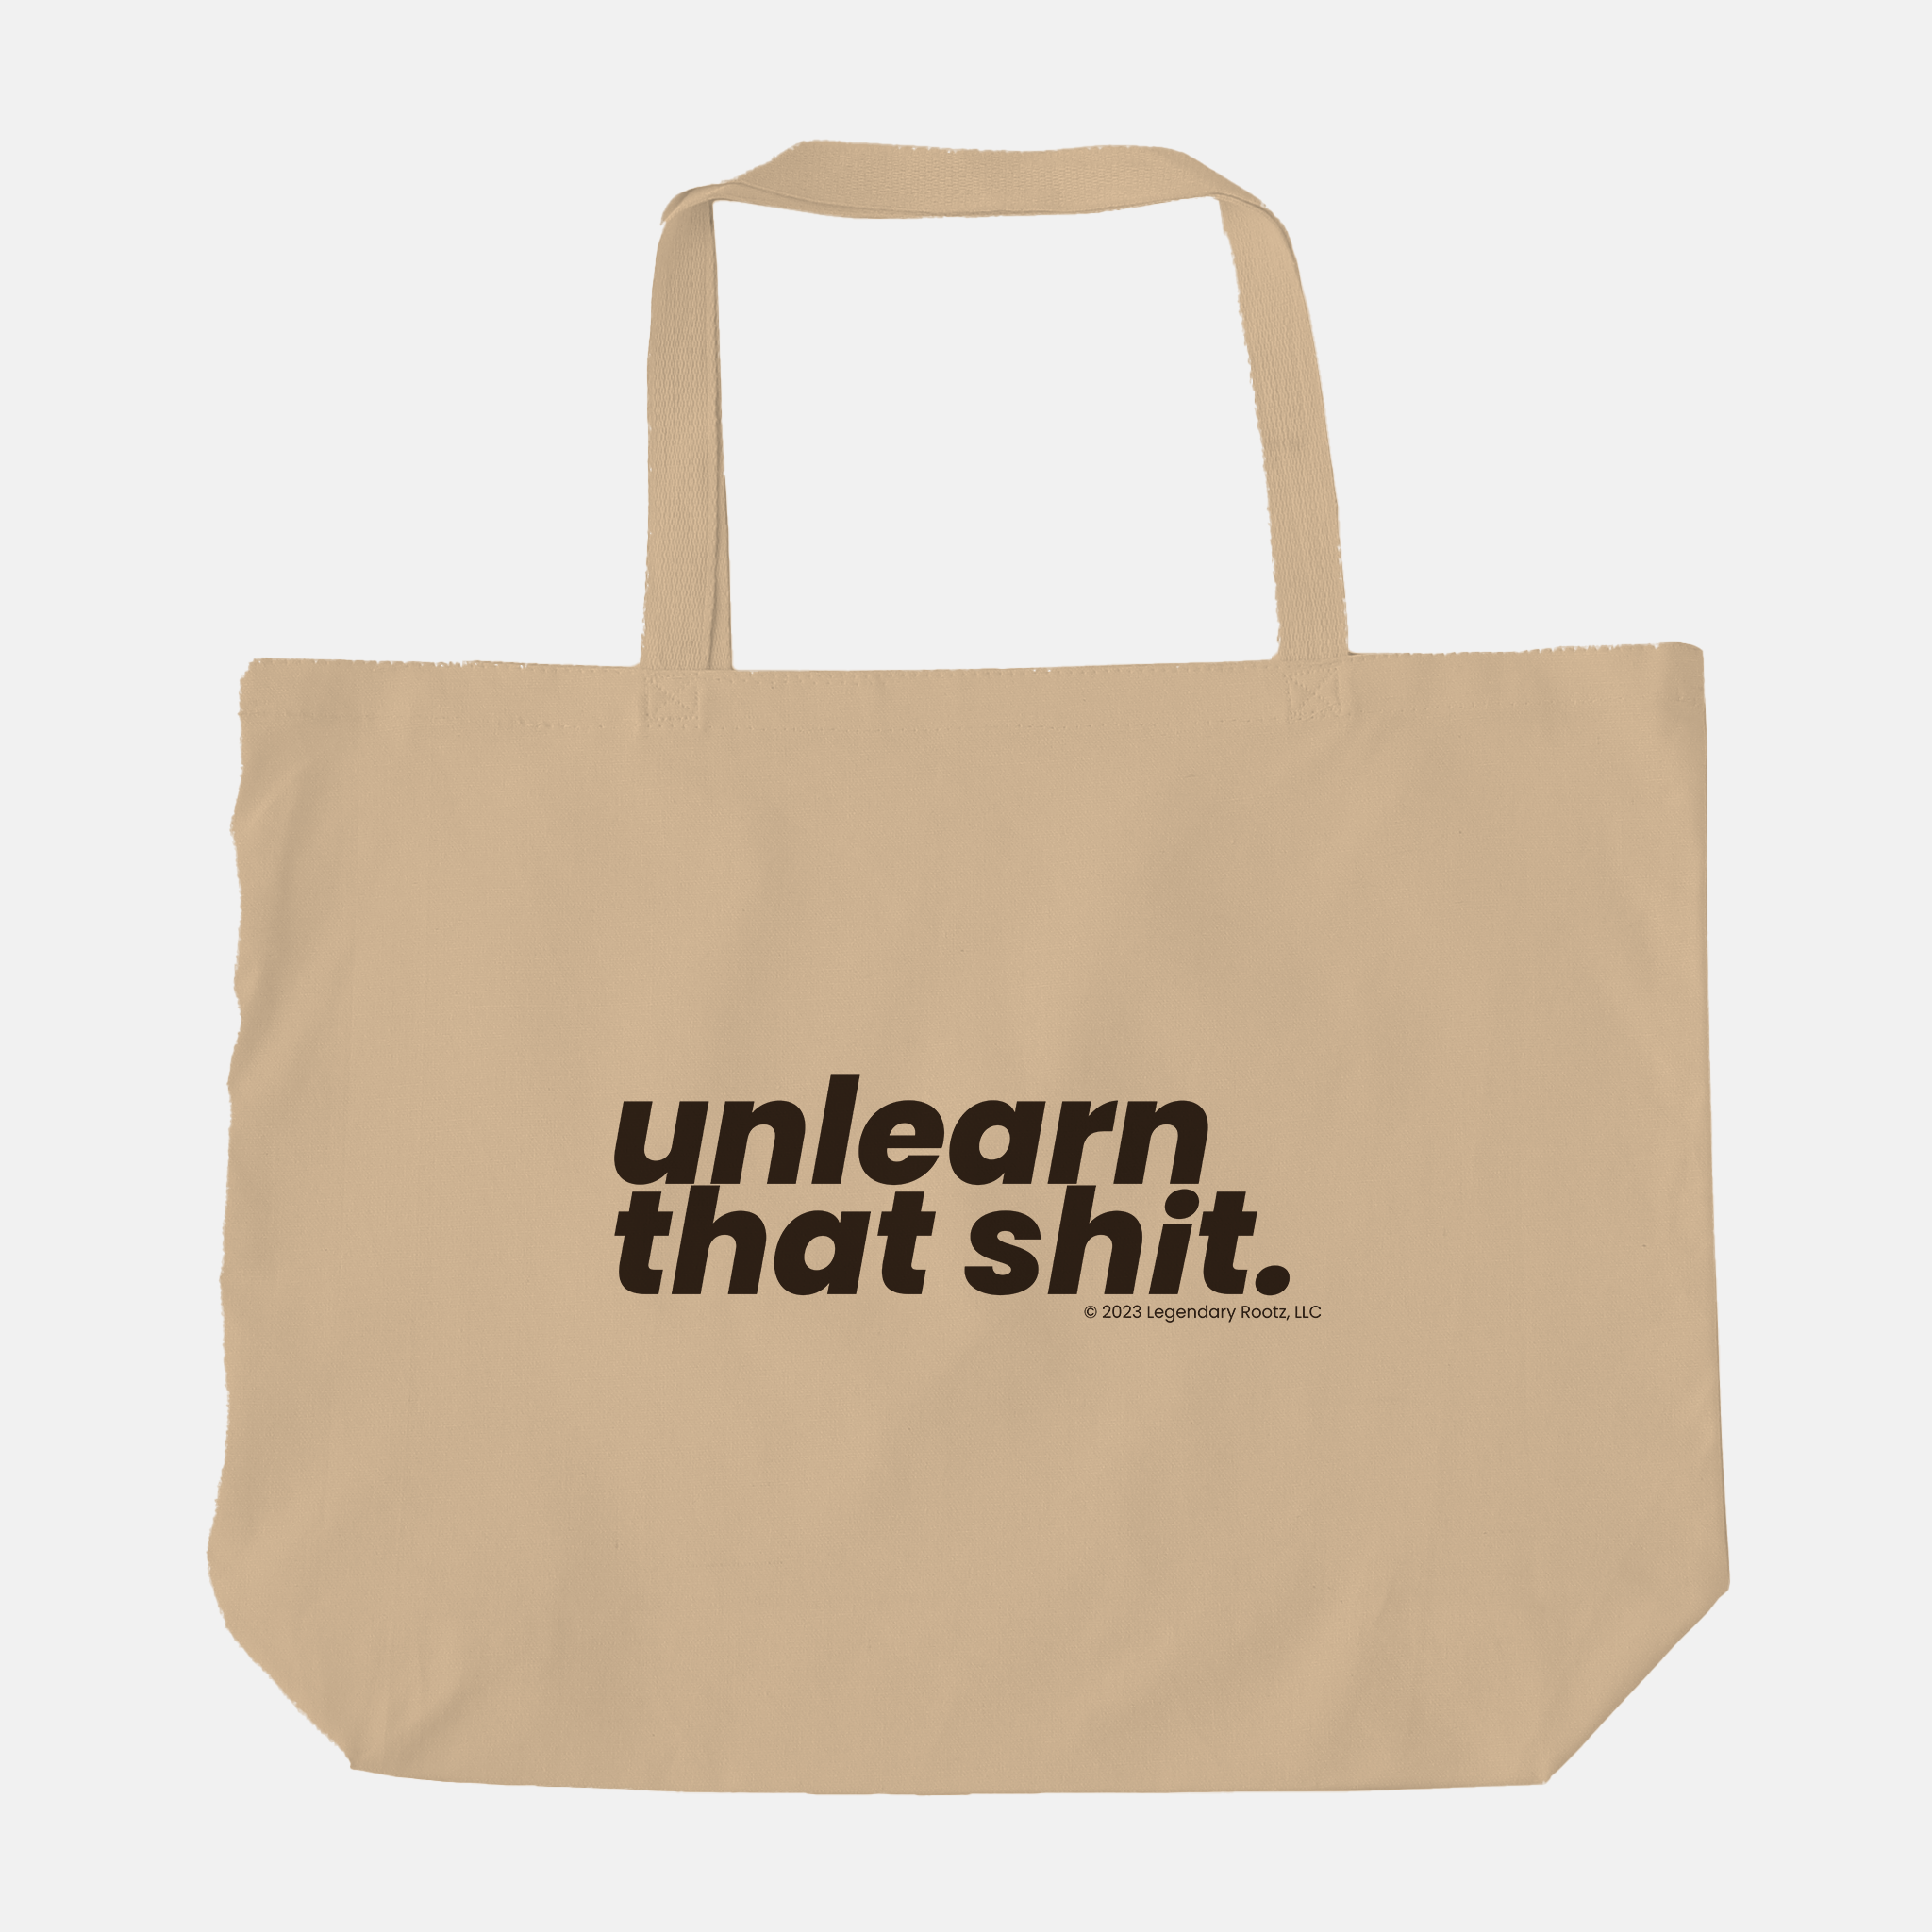 Unlearn That Sh*t | Tote Bag